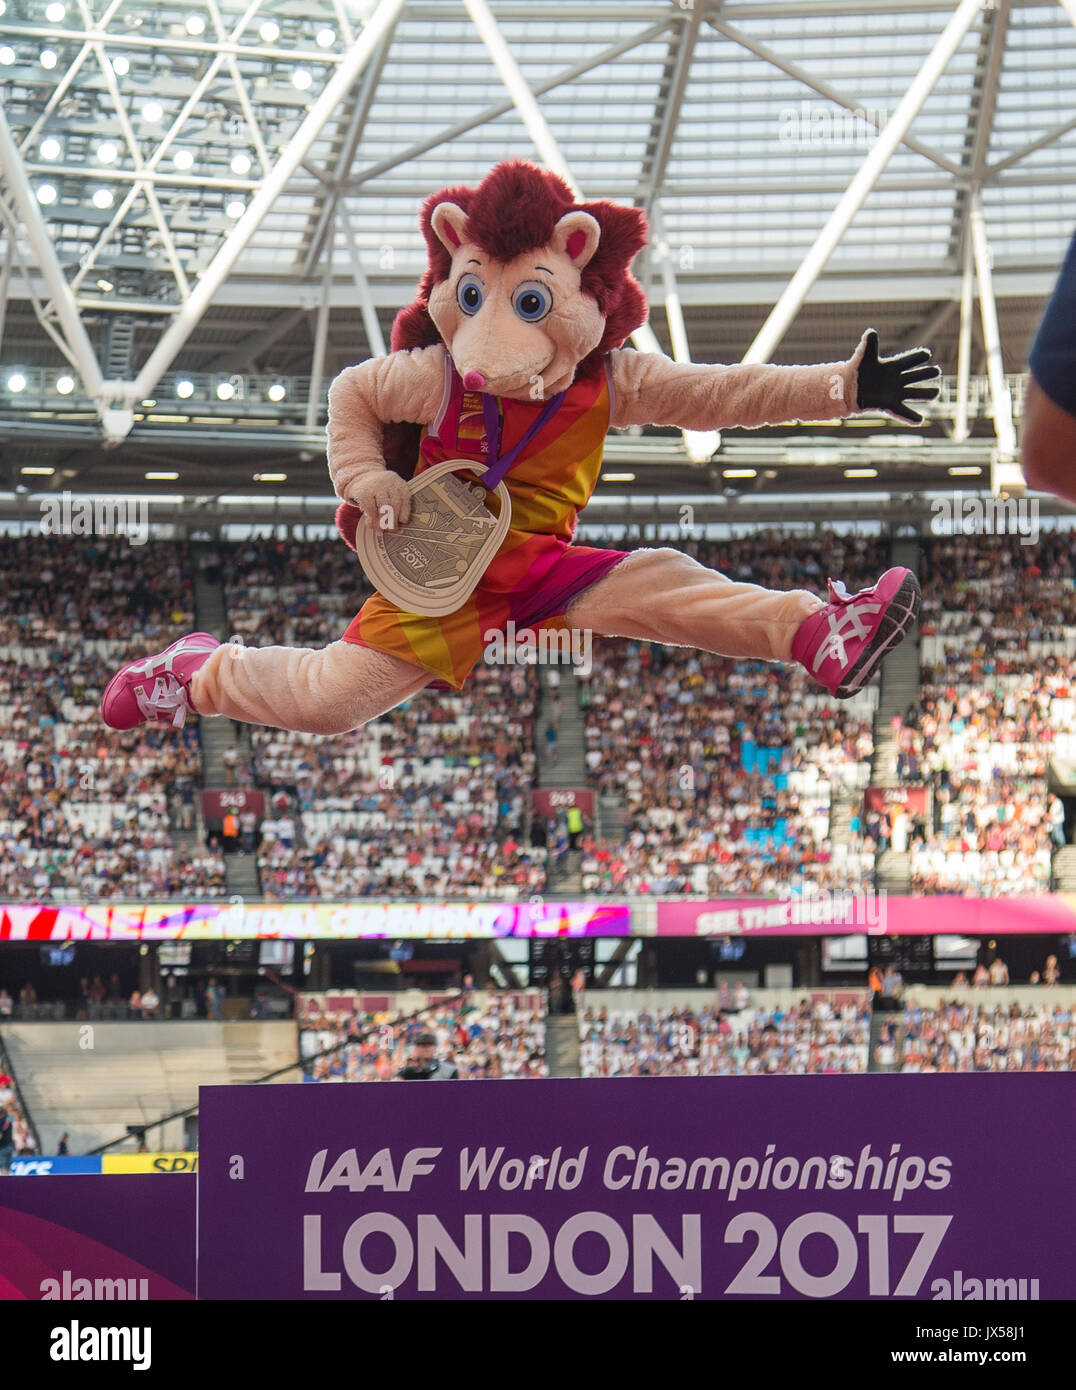 London, UK. 13th Aug, 2017. HERO the Hedgehog mascot celebrates after collecting a Gold Medal as best ever mascot at a World Athletics Games during the Final Day of the IAAF World Athletics Championships (Day 10) at the Olympic Park, London, England on 13 August 2017. Photo by Andy Rowland/PRiME Media Images./Alamy Live News Stock Photo